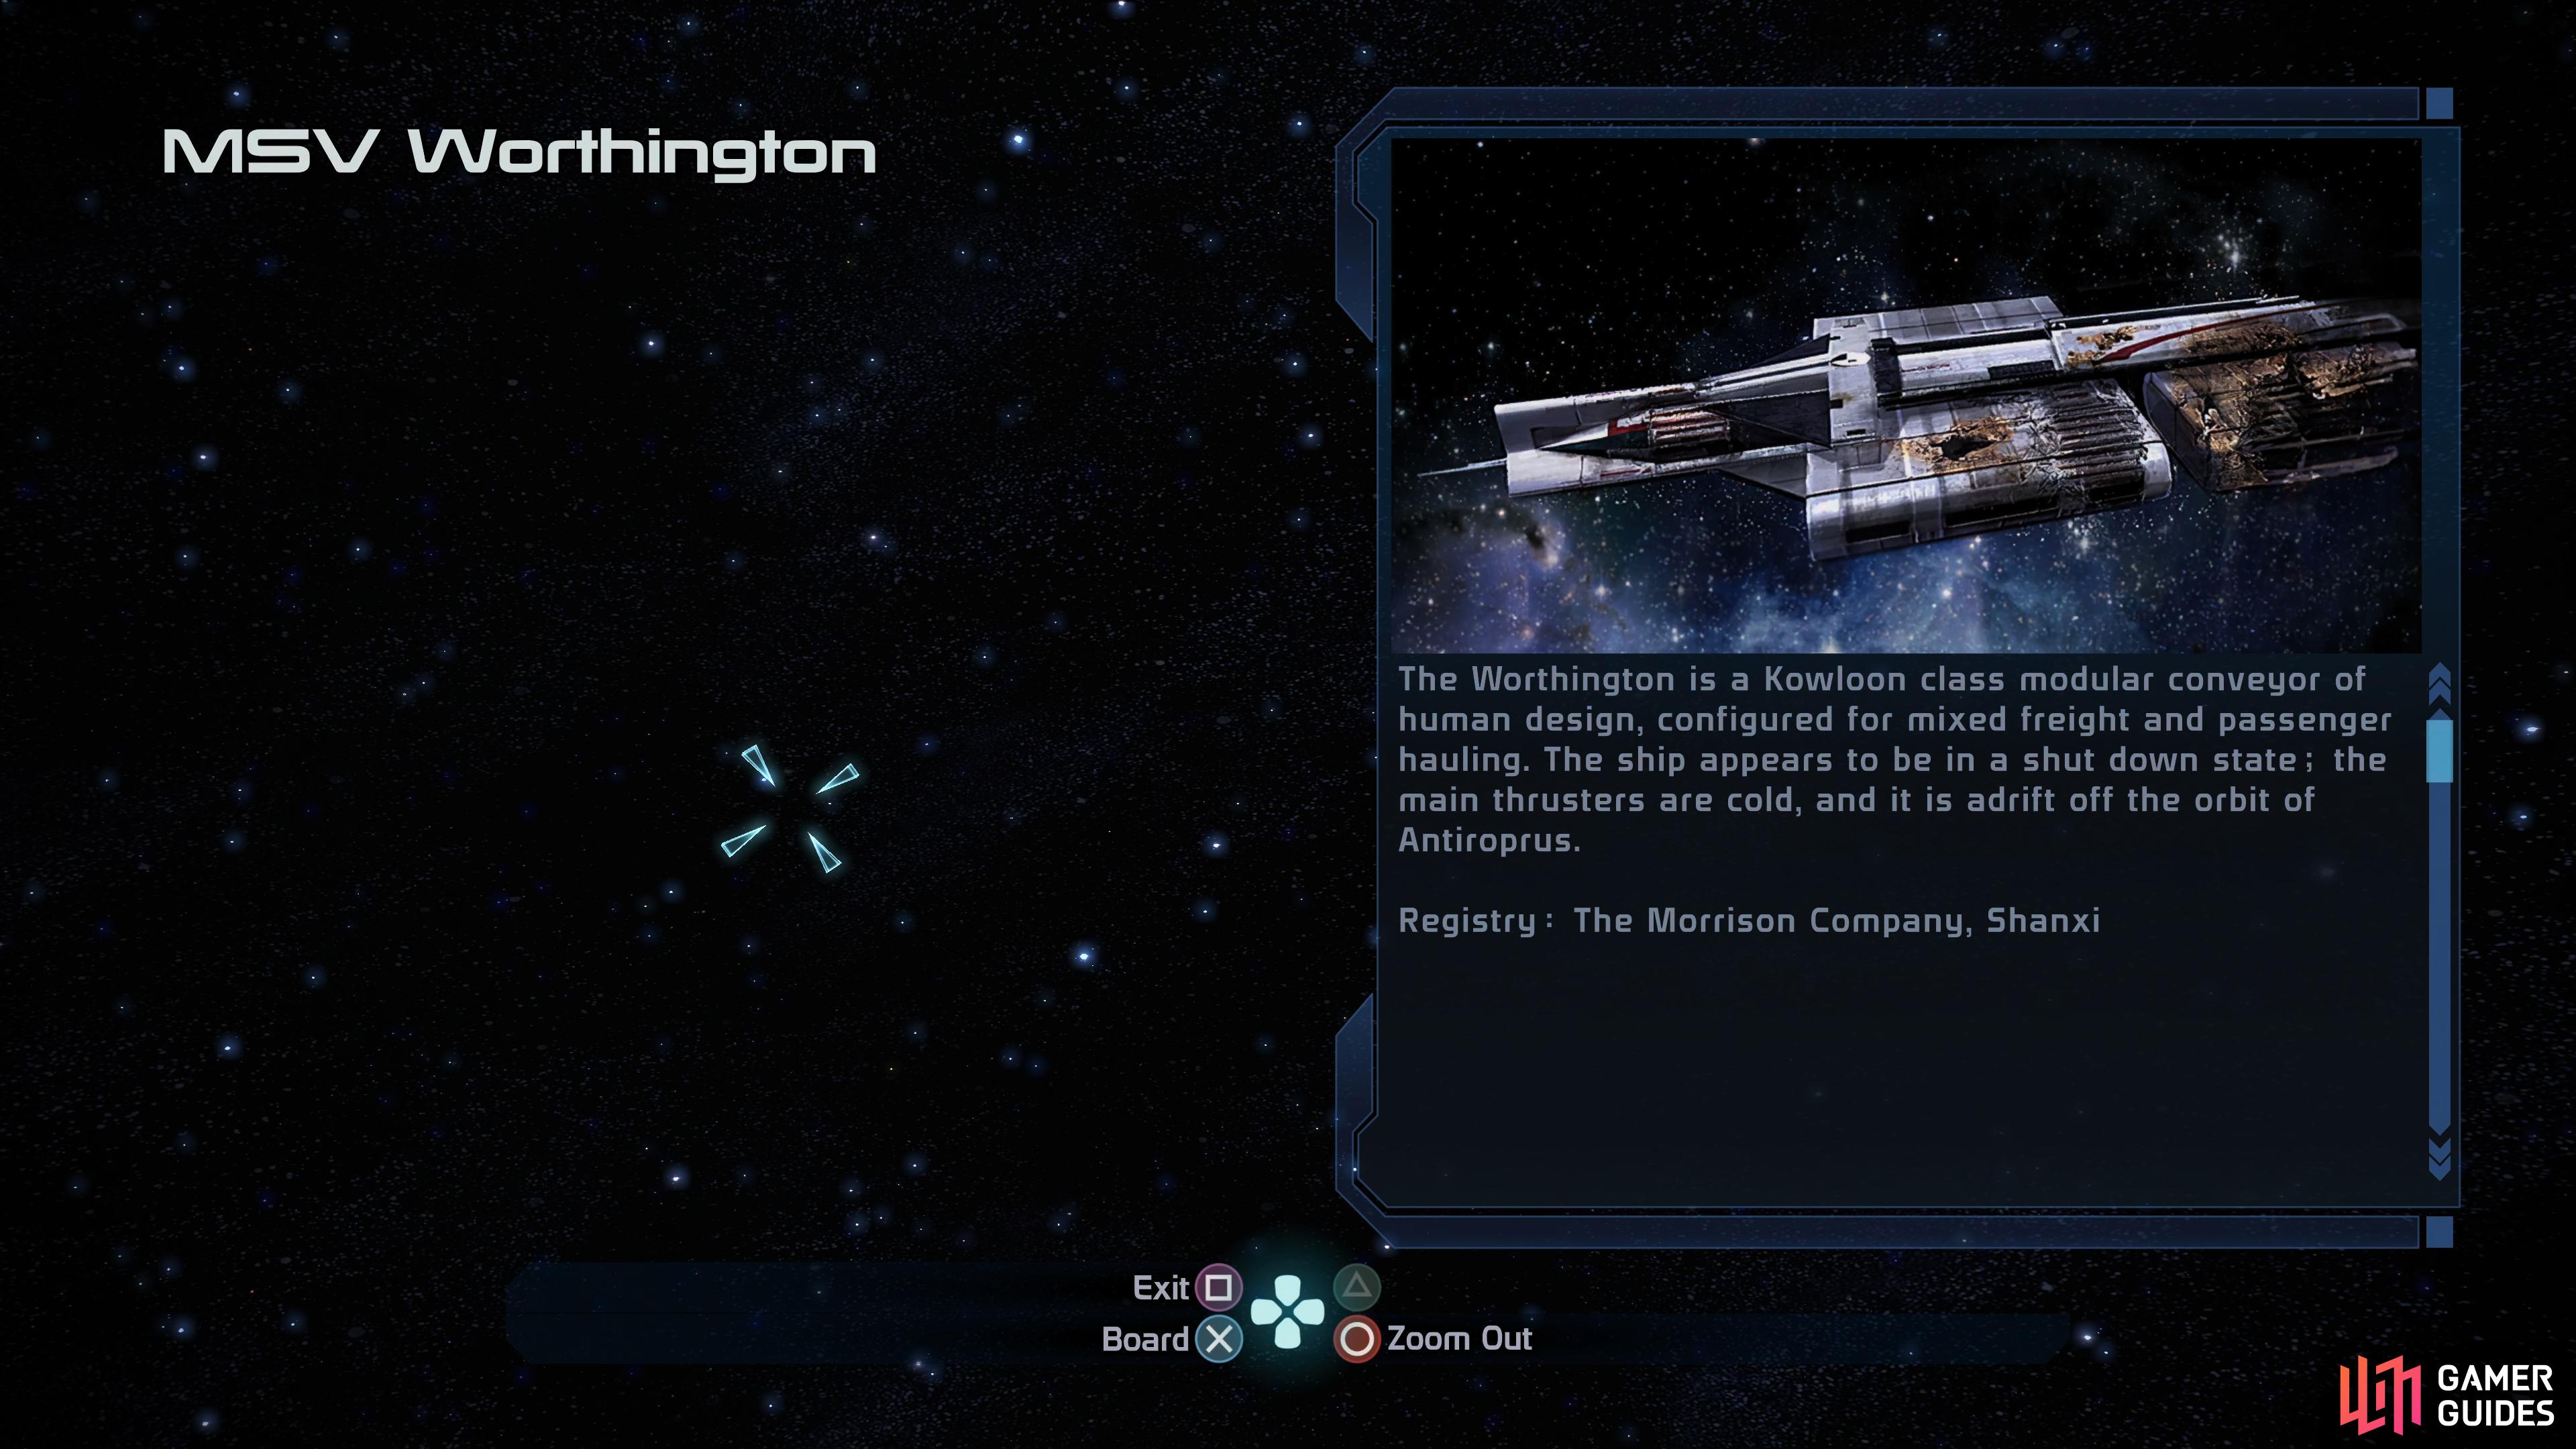 You'll find the derelict MSV Worthington in the Ming system.